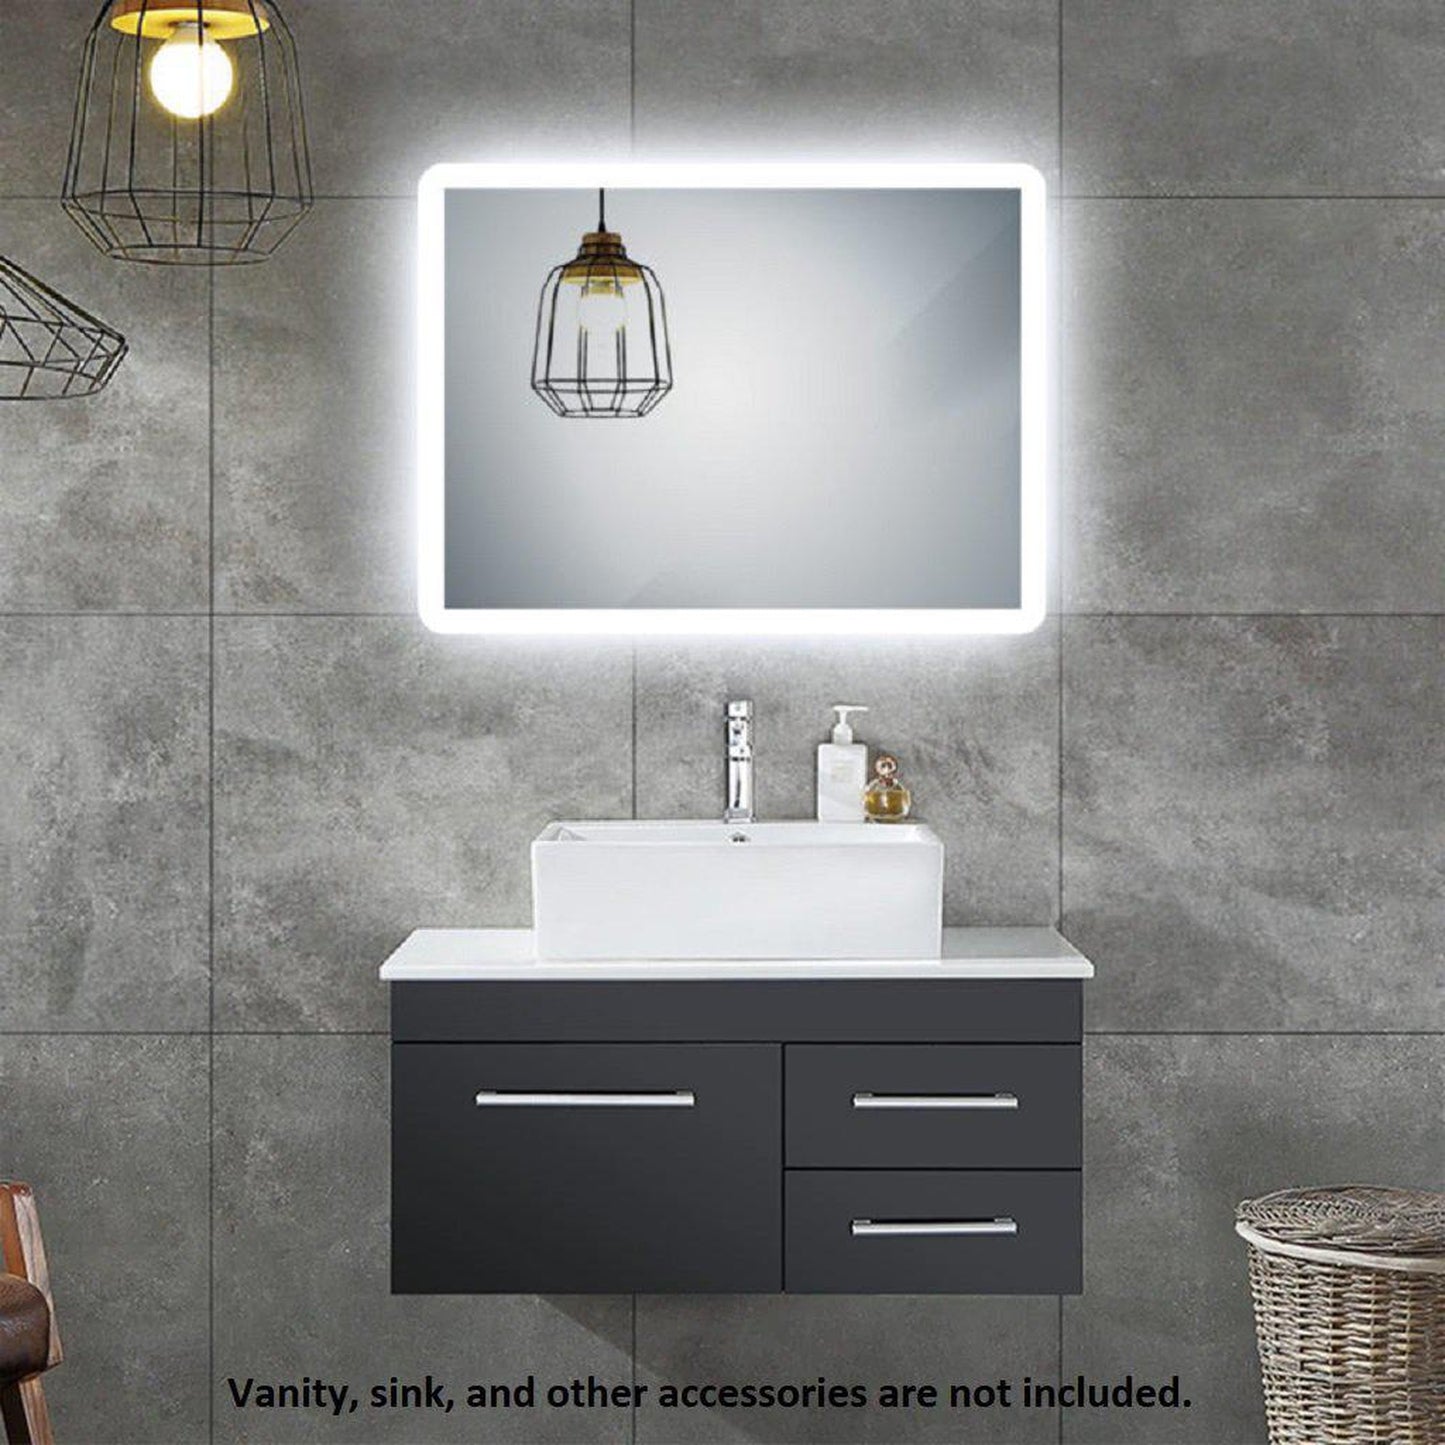 Lighted Impressions Blazer 32" x 24" Rectangular Frameless Wall-Mounted LED Mirror With 3-Section Rocker Switch